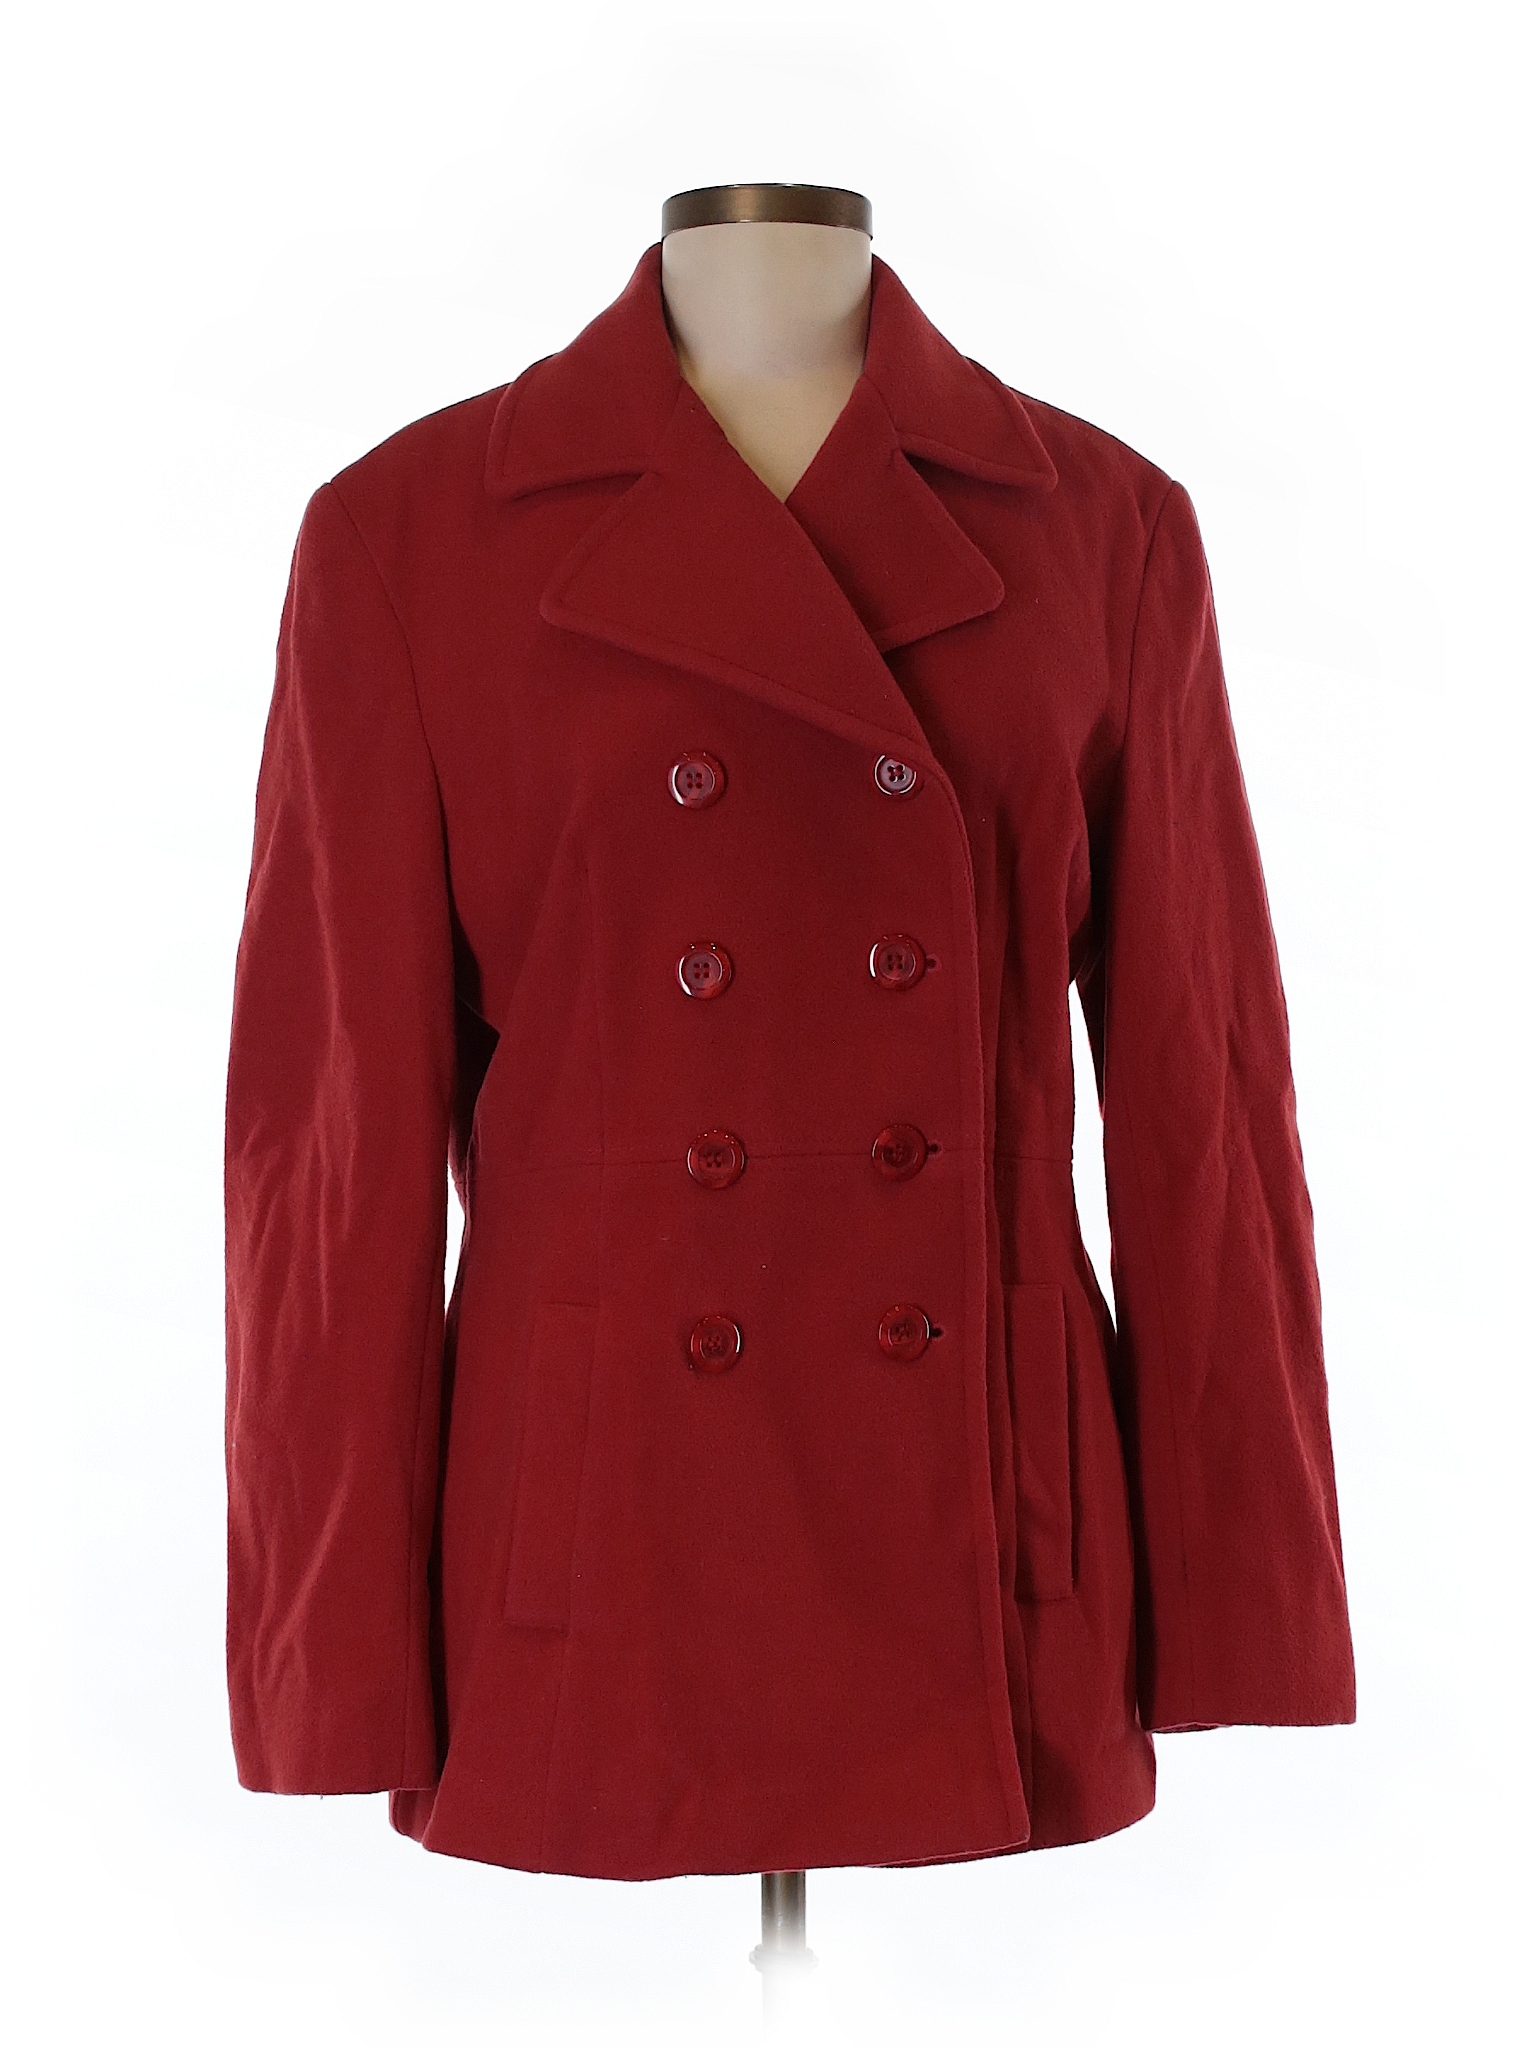 Mackintosh New England 100% Wool Solid Red Wool Coat Size 8 - 96% off ...